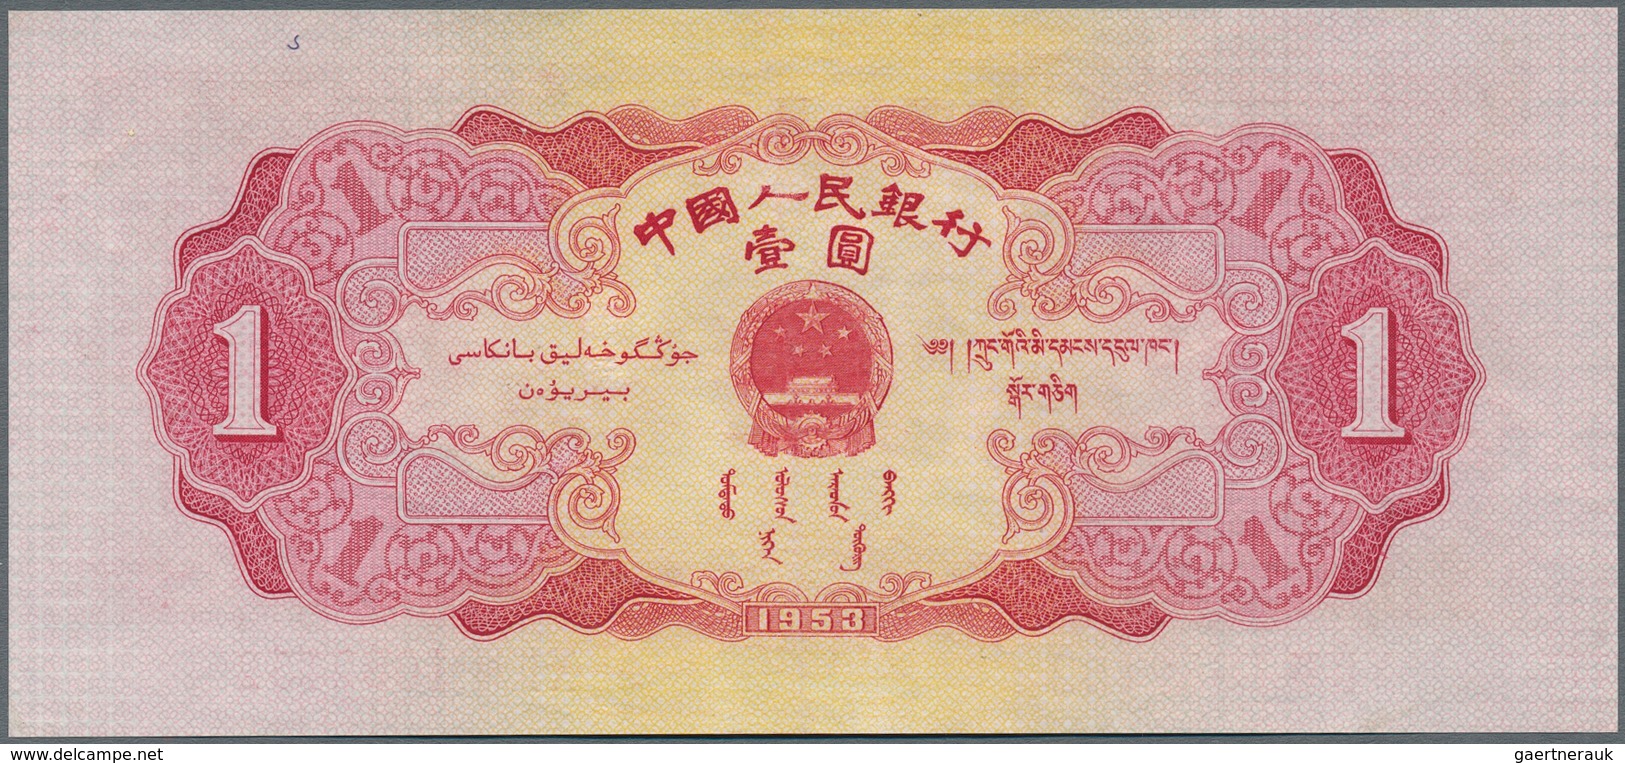 China: Peoples Republic Of China 1953 Second Issue 1 Yuan 1953, P.866 With Watermark Stars, Still St - China